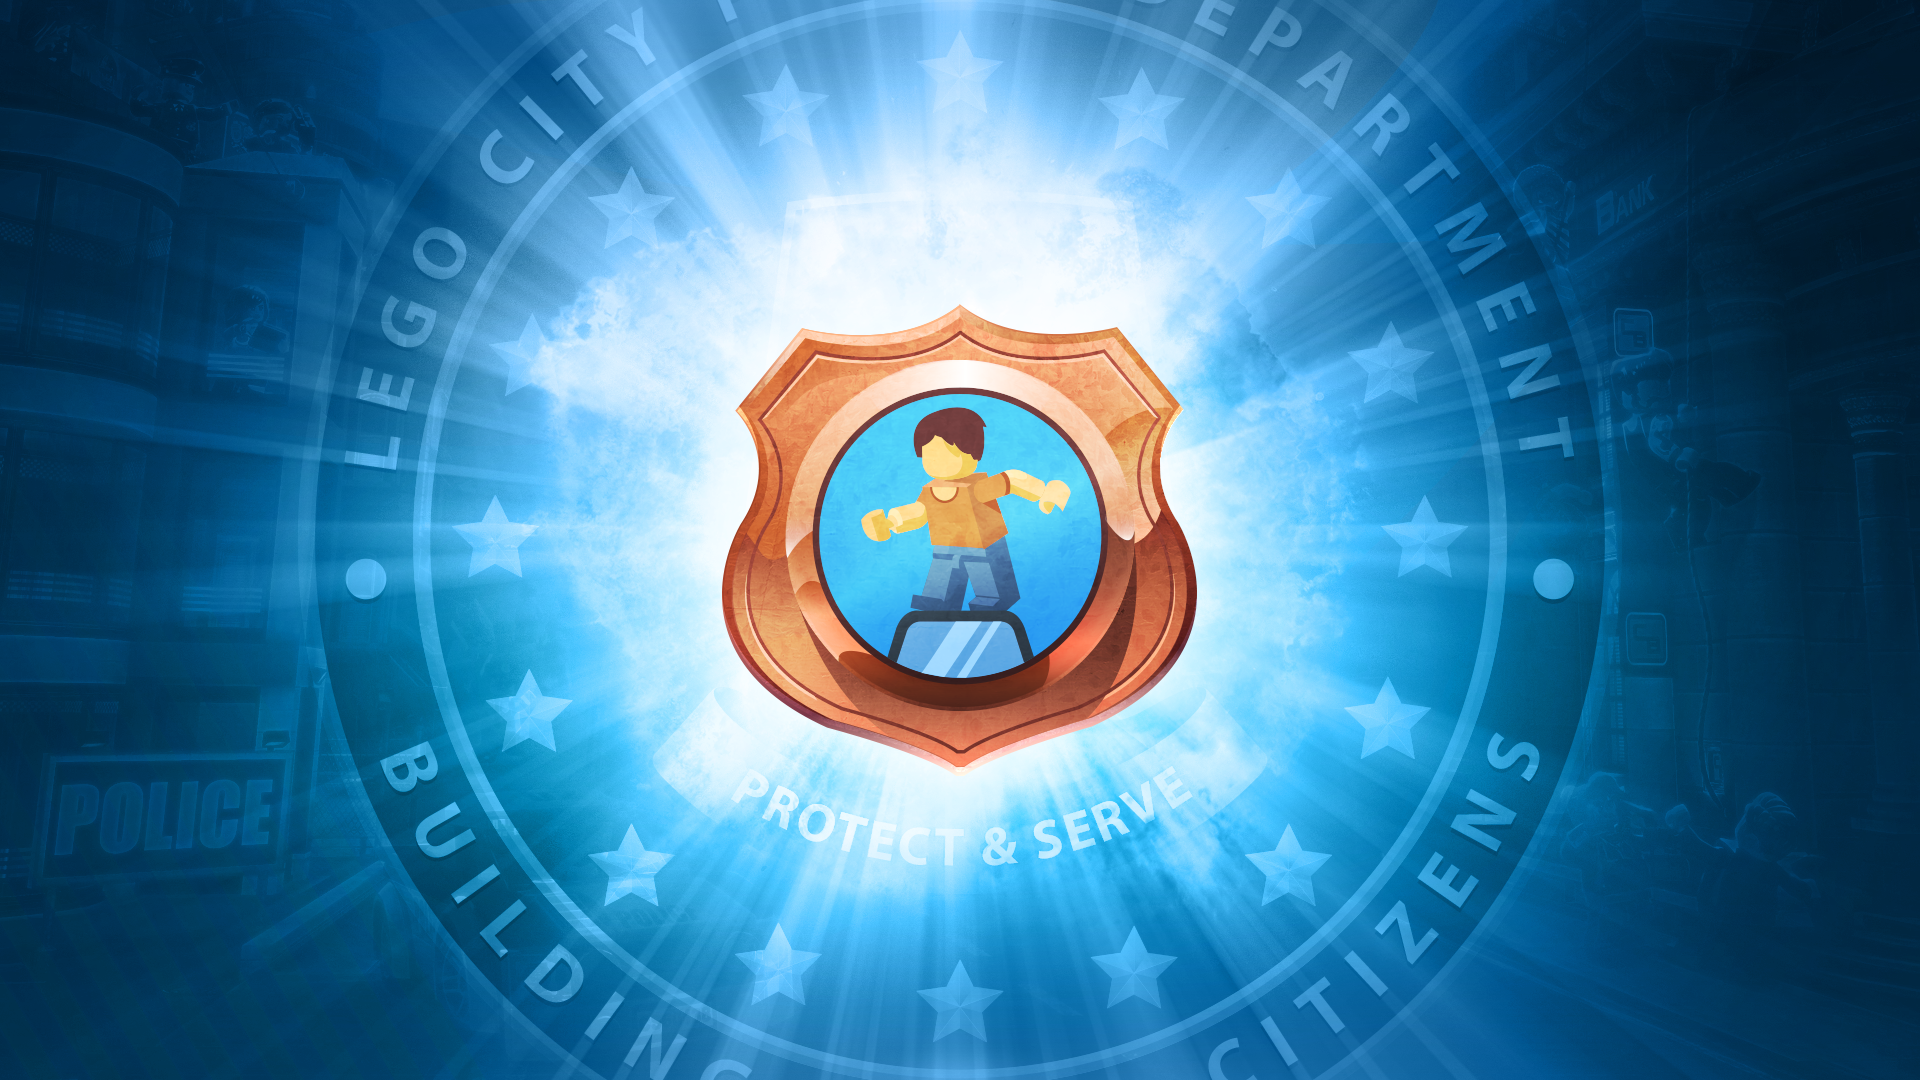 Icon for Steel Surfer